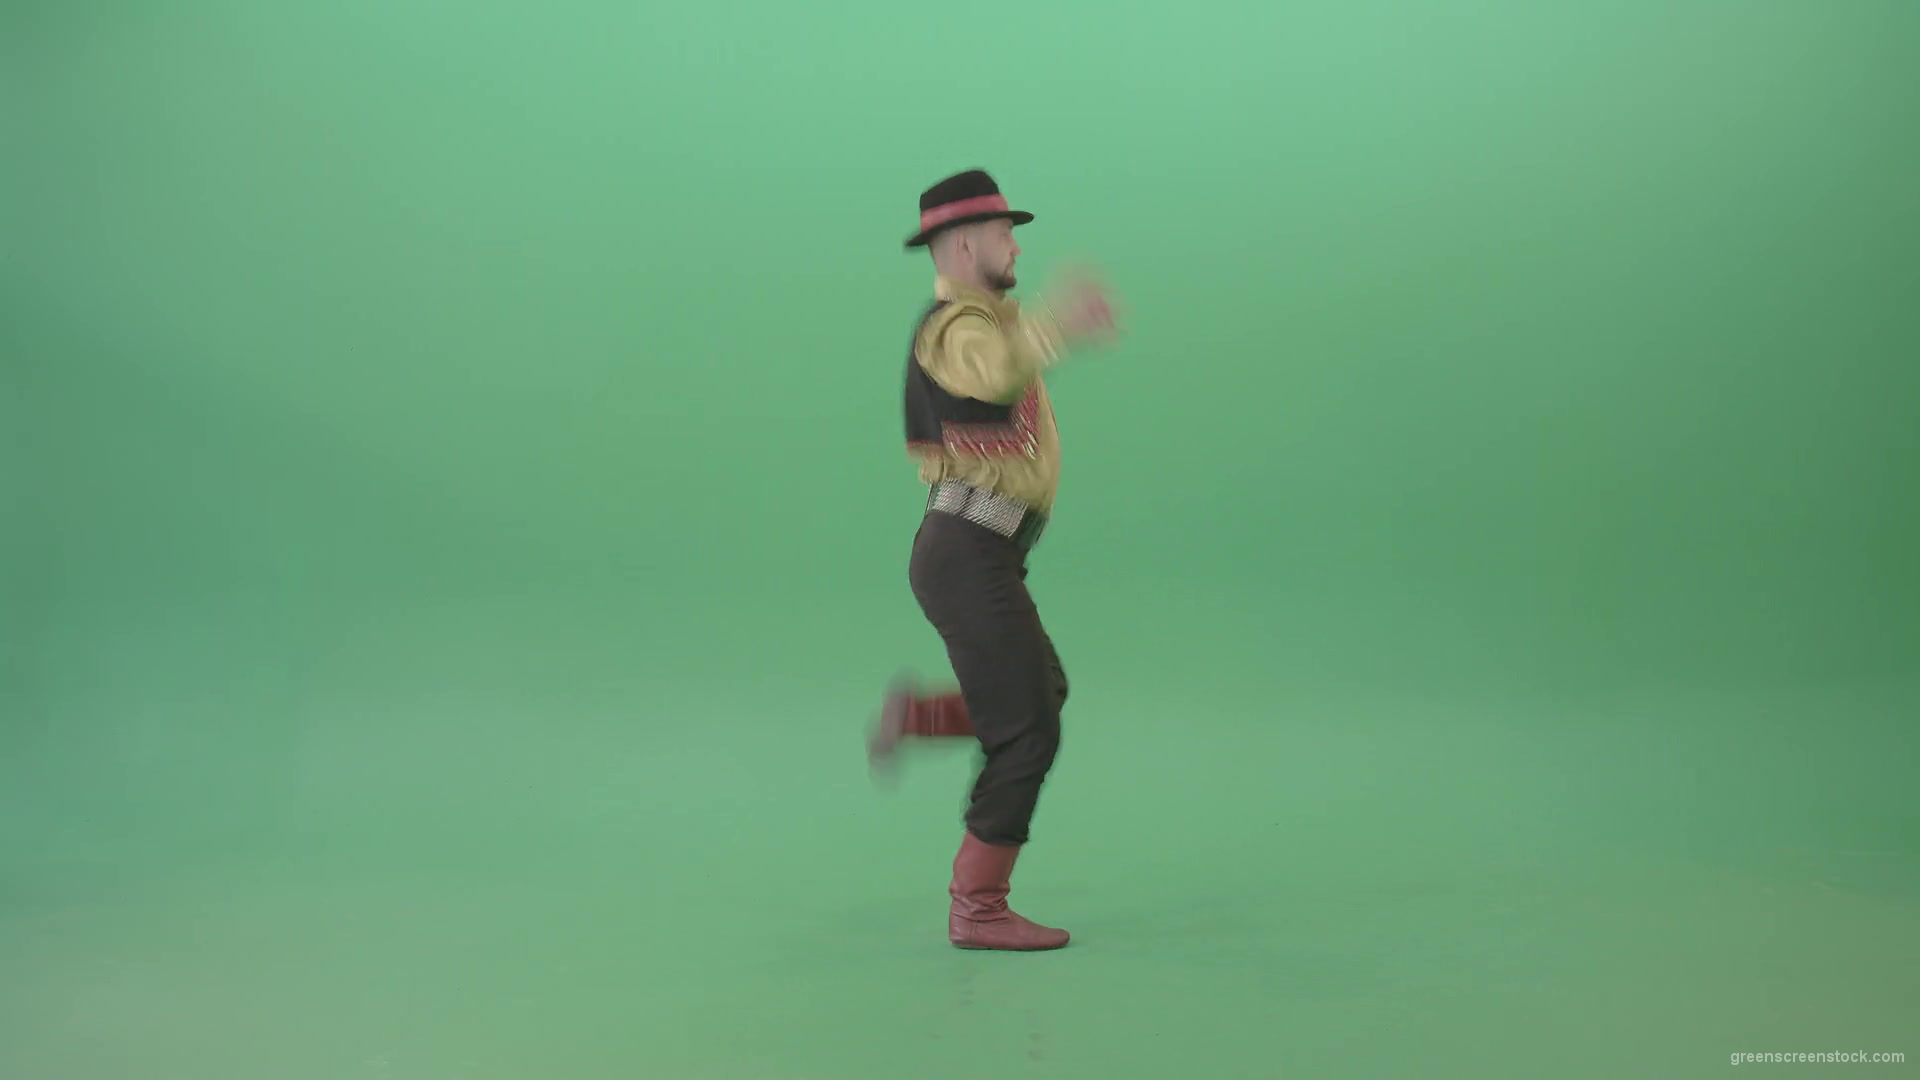 Romanian-Gypsy-Man-dancing-with-clapping-hand-with-side-view-isolated-4K-Green-Screen-Video-Footage-1920_009 Green Screen Stock